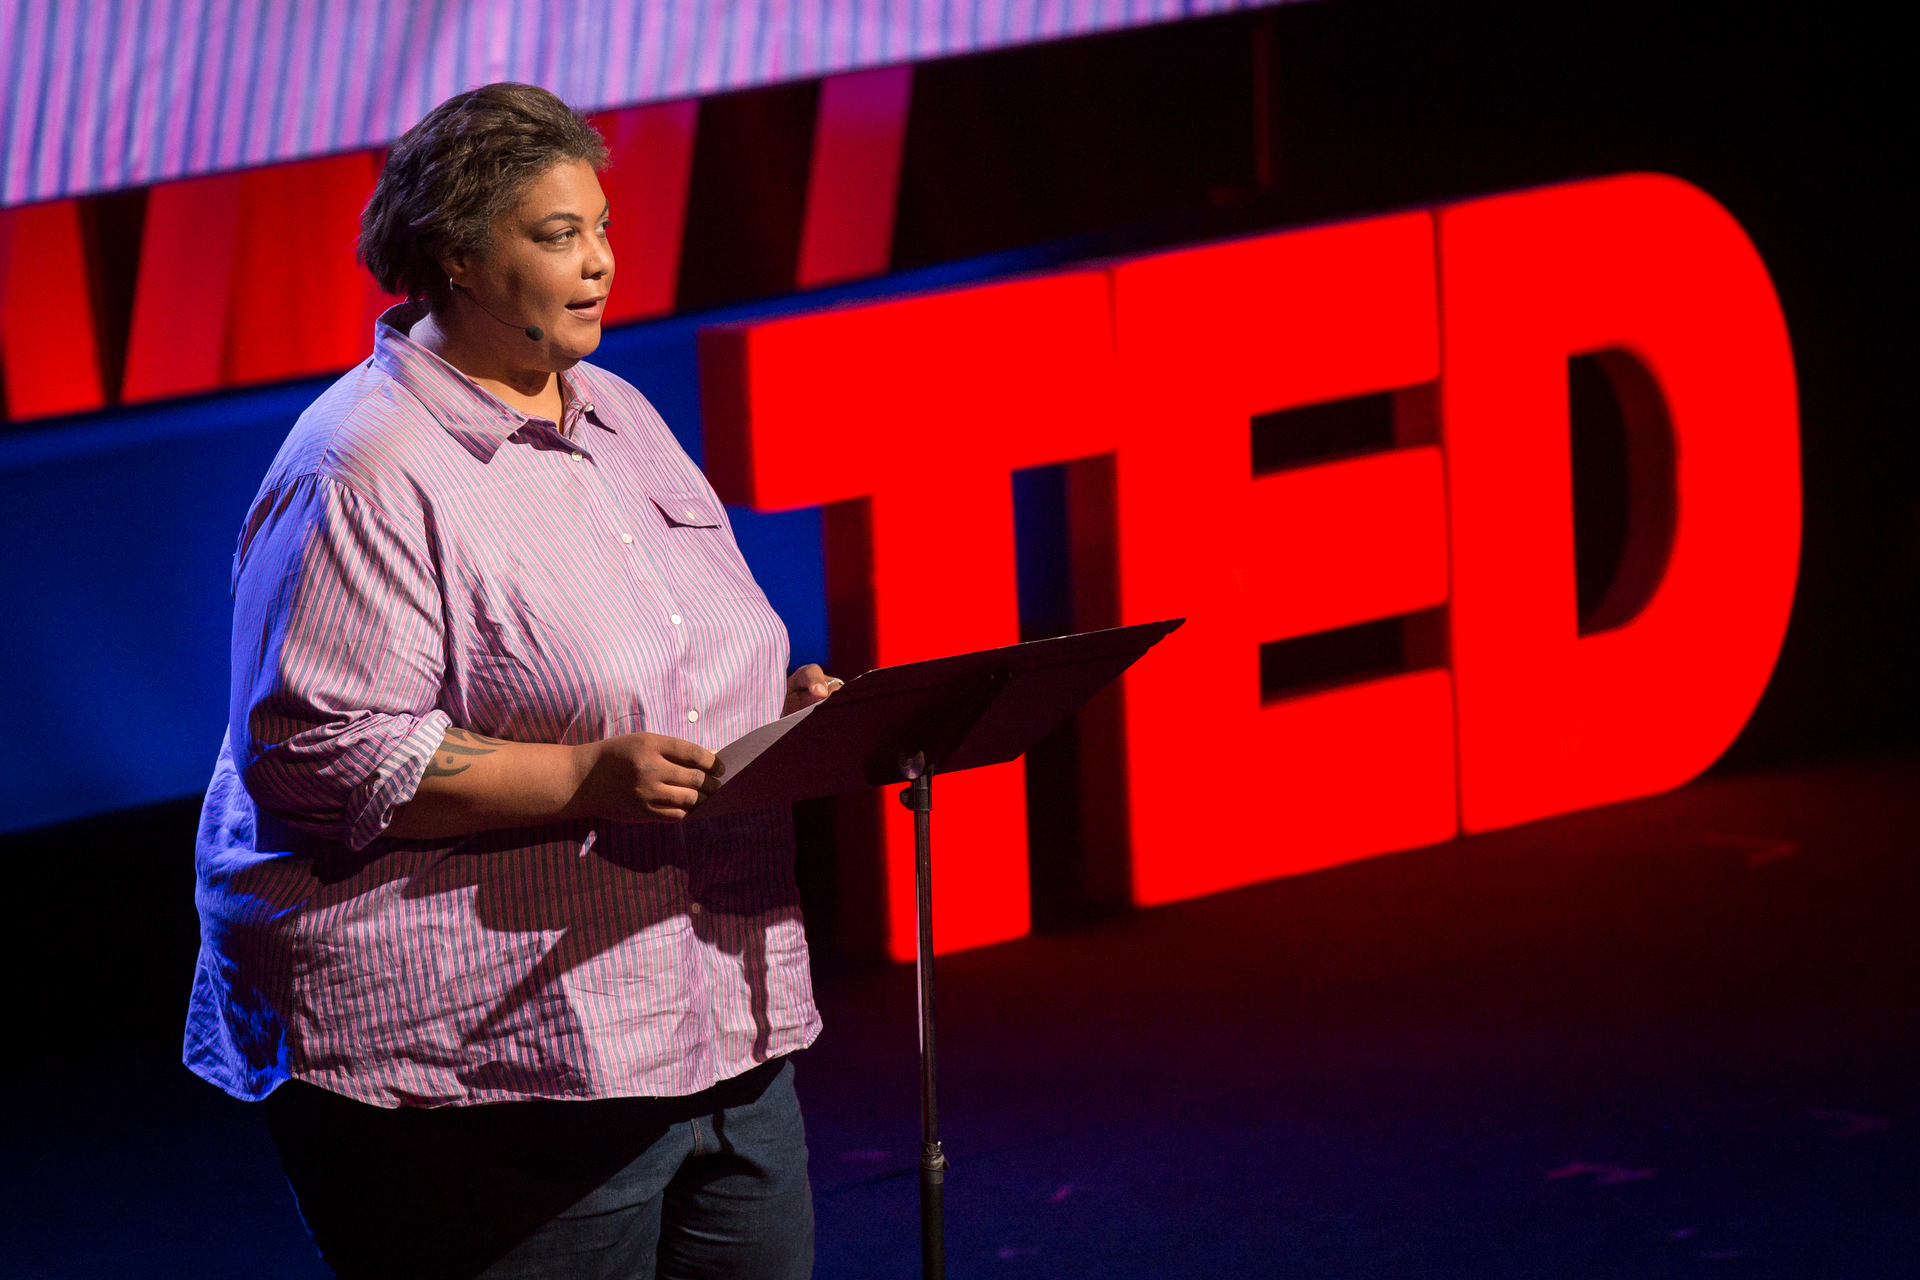 Roxane Gay speaks at TEDWomen2015 - Momentum, Session 2, May 28, 2015, Monterey Conference Center, Monterey, California, USA. Photo: Marla Aufmuth/TED